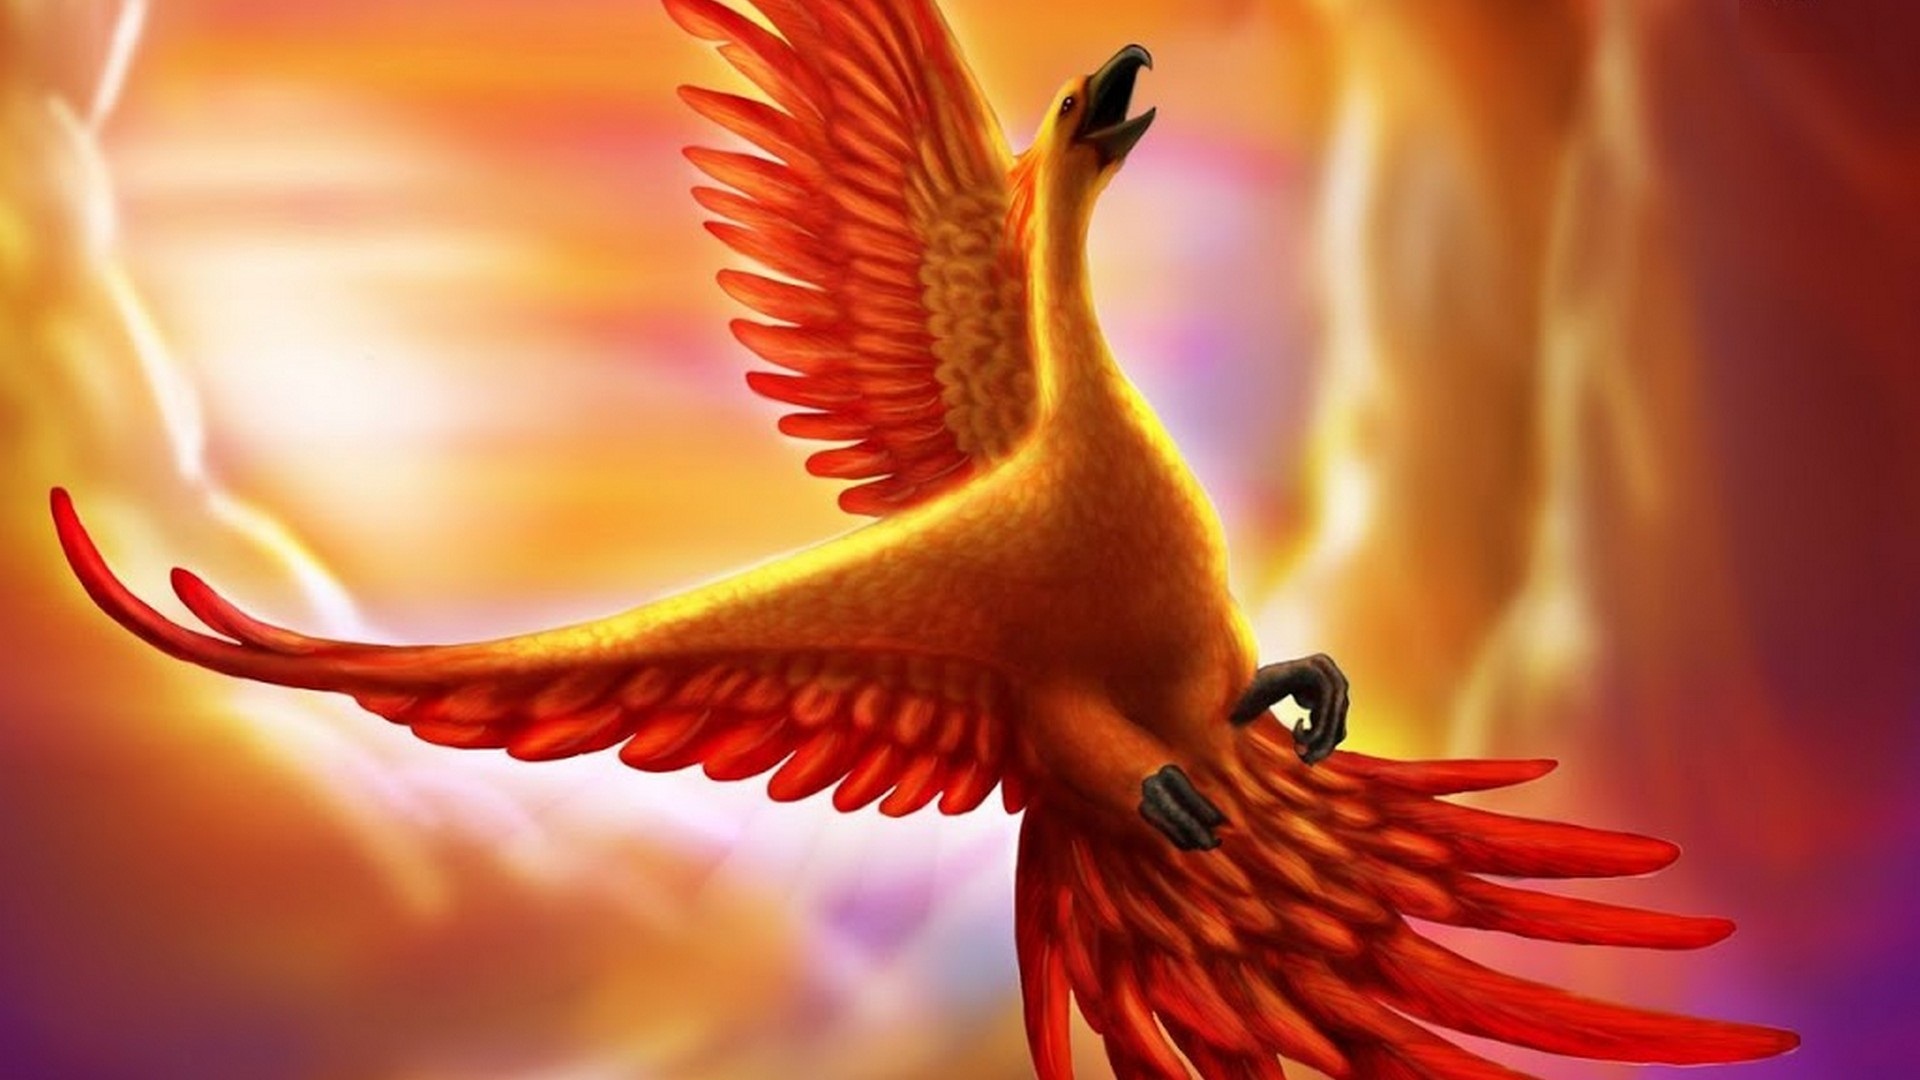 Best Phoenix Images Wallpaper HD With Resolution 1920X1080 pixel. You can make this wallpaper for your Desktop Computer Backgrounds, Mac Wallpapers, Android Lock screen or iPhone Screensavers